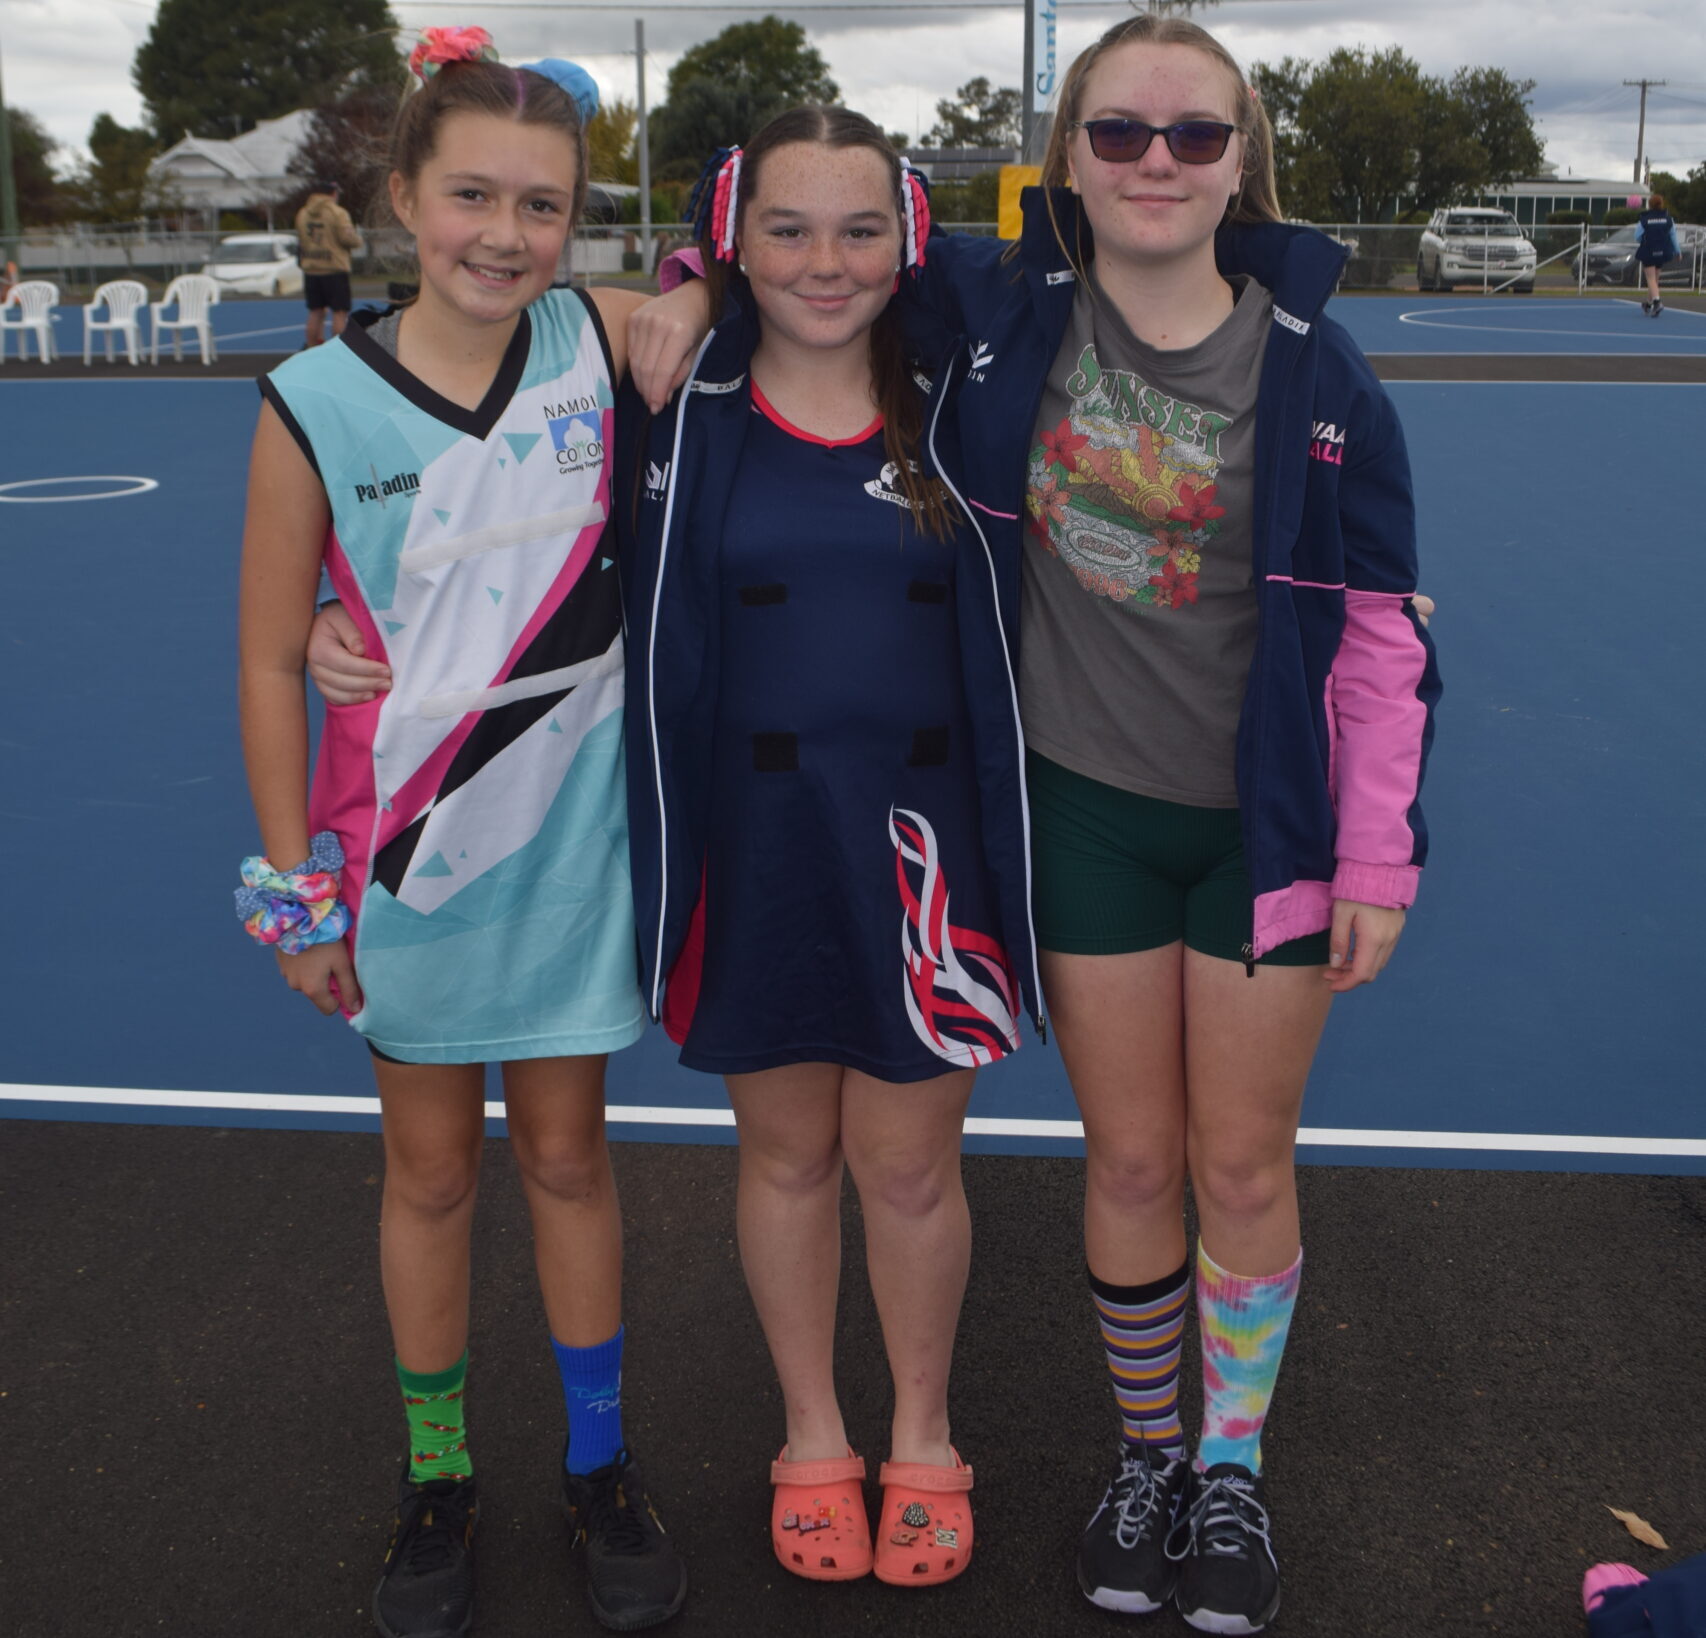 Narrabri Netball Association hosts super rounds and a crazy sock and hair charity day